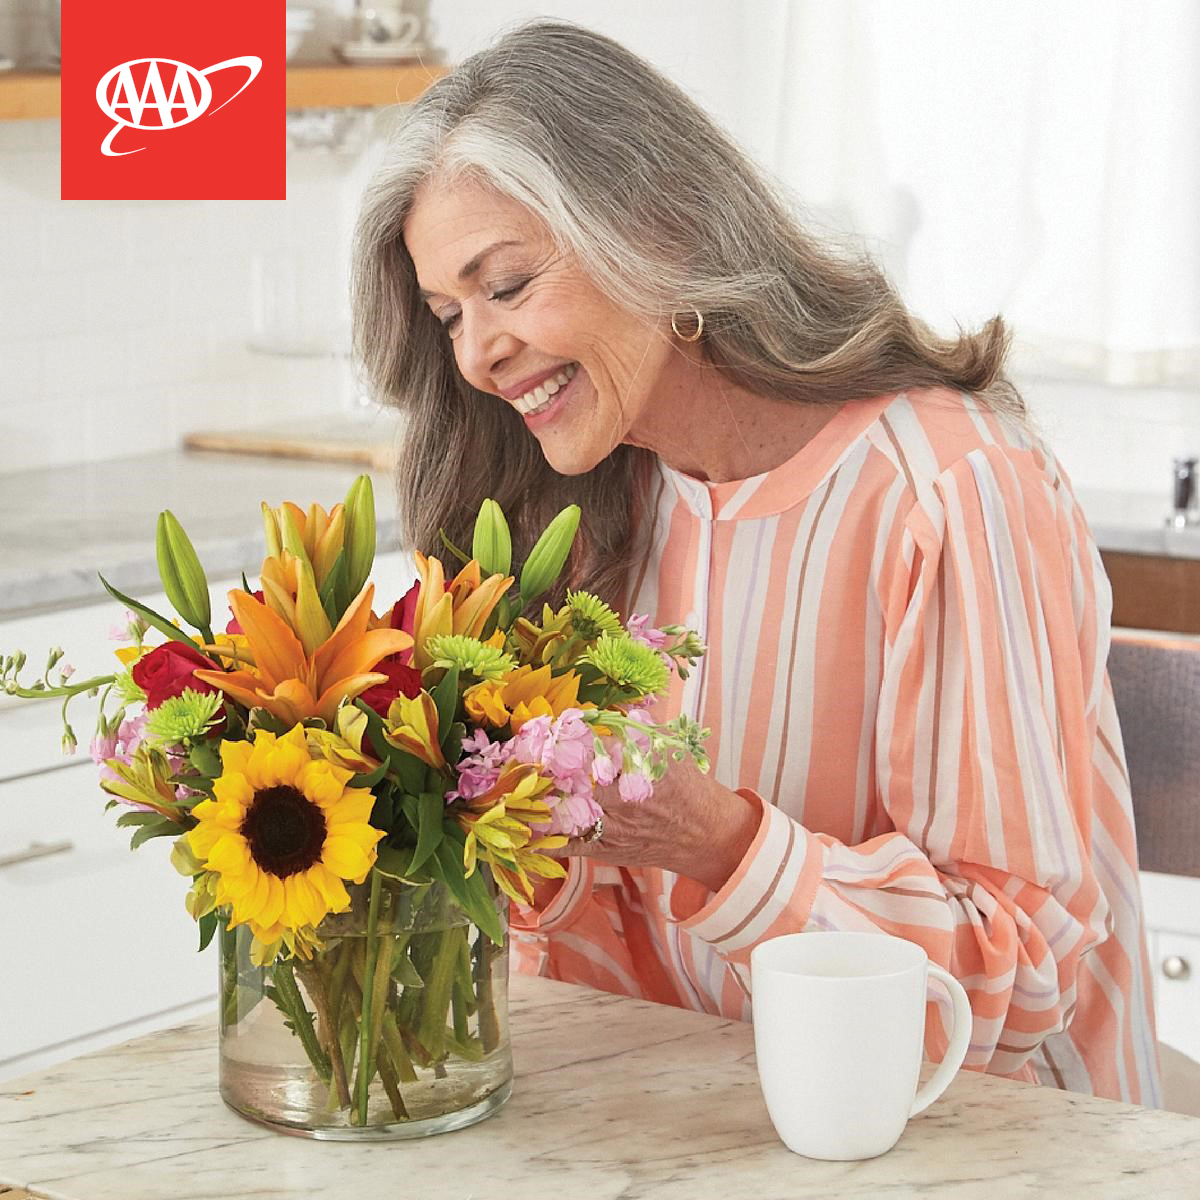 Make Mom smile with an extra special gift. Save up to 30% on flowers, gift baskets, sweets, and more. spr.ly/6017wllUt